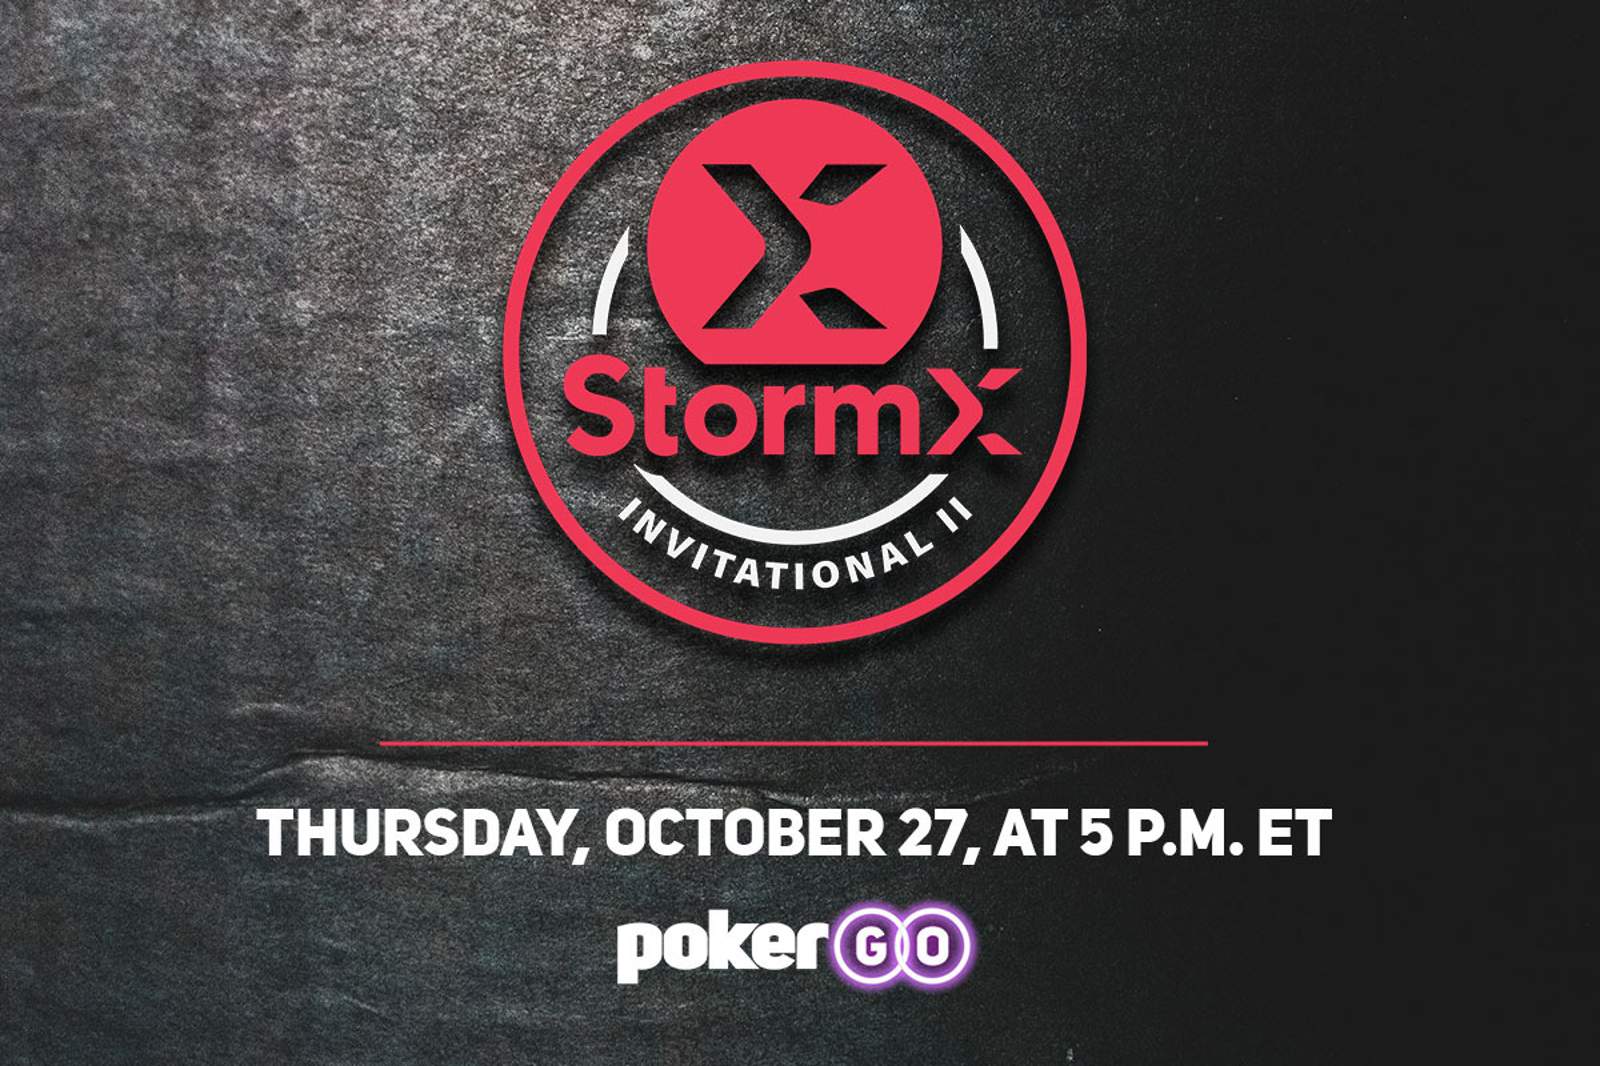 Watch the StormX Invitational II Live On Thursday